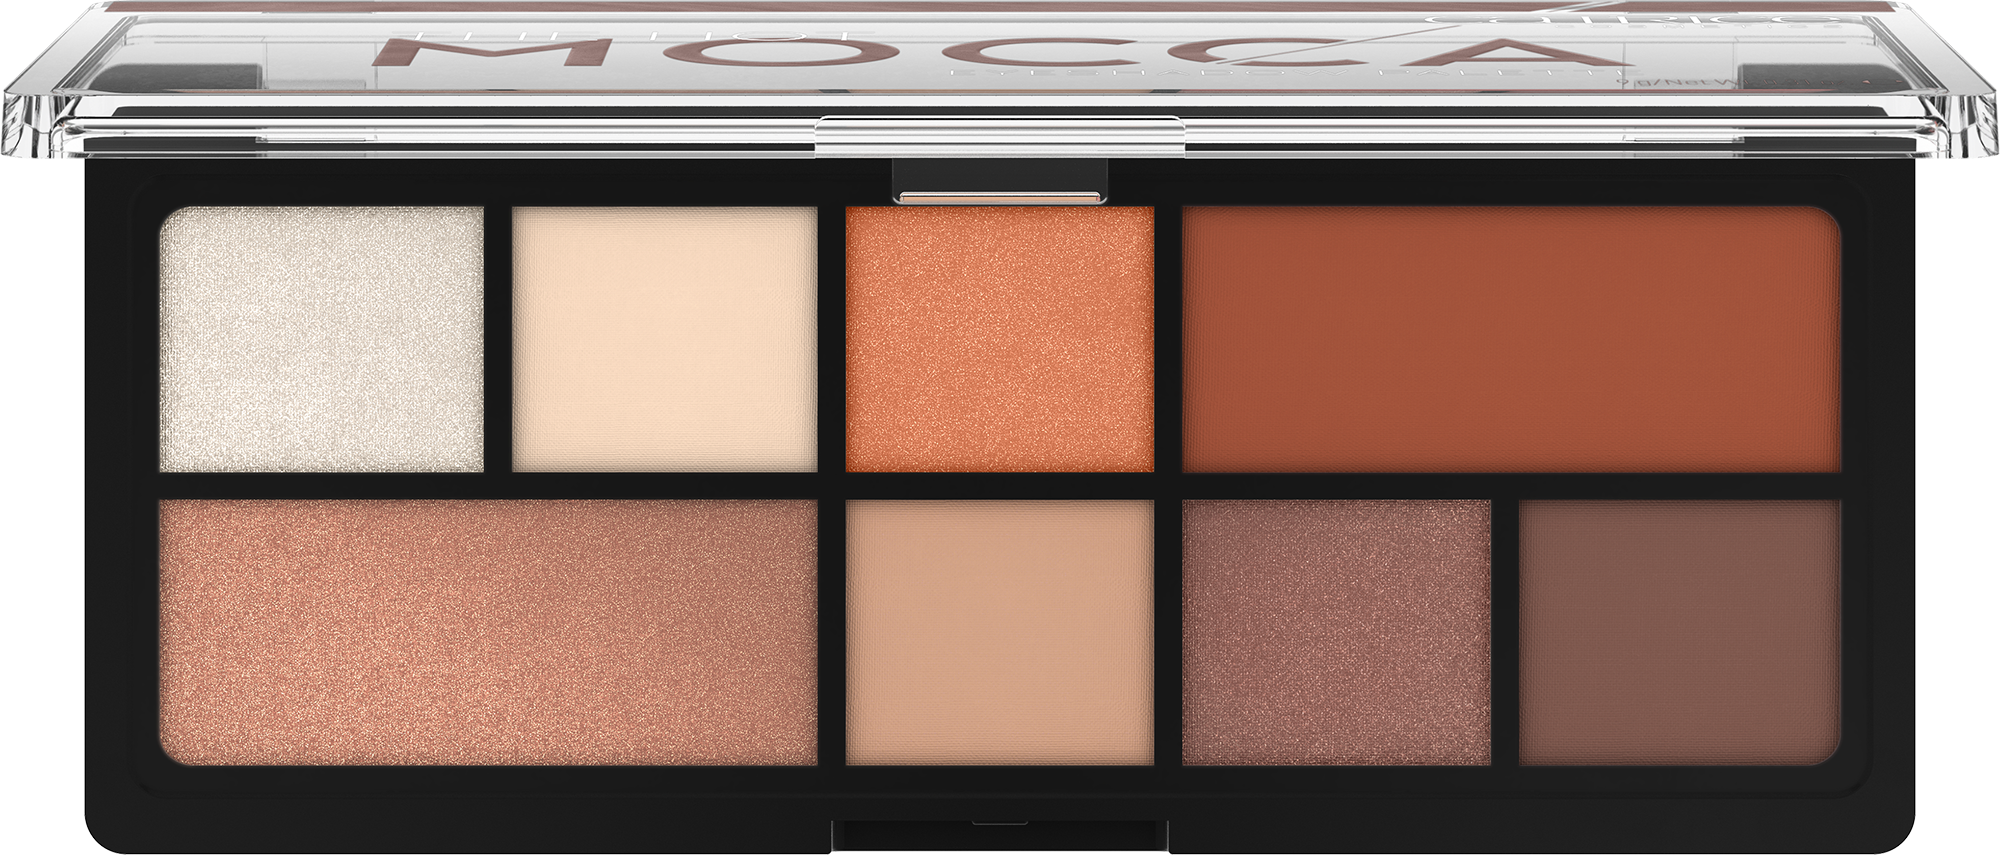 Catrice THE HOT MOCCA Eyeshadow Palette